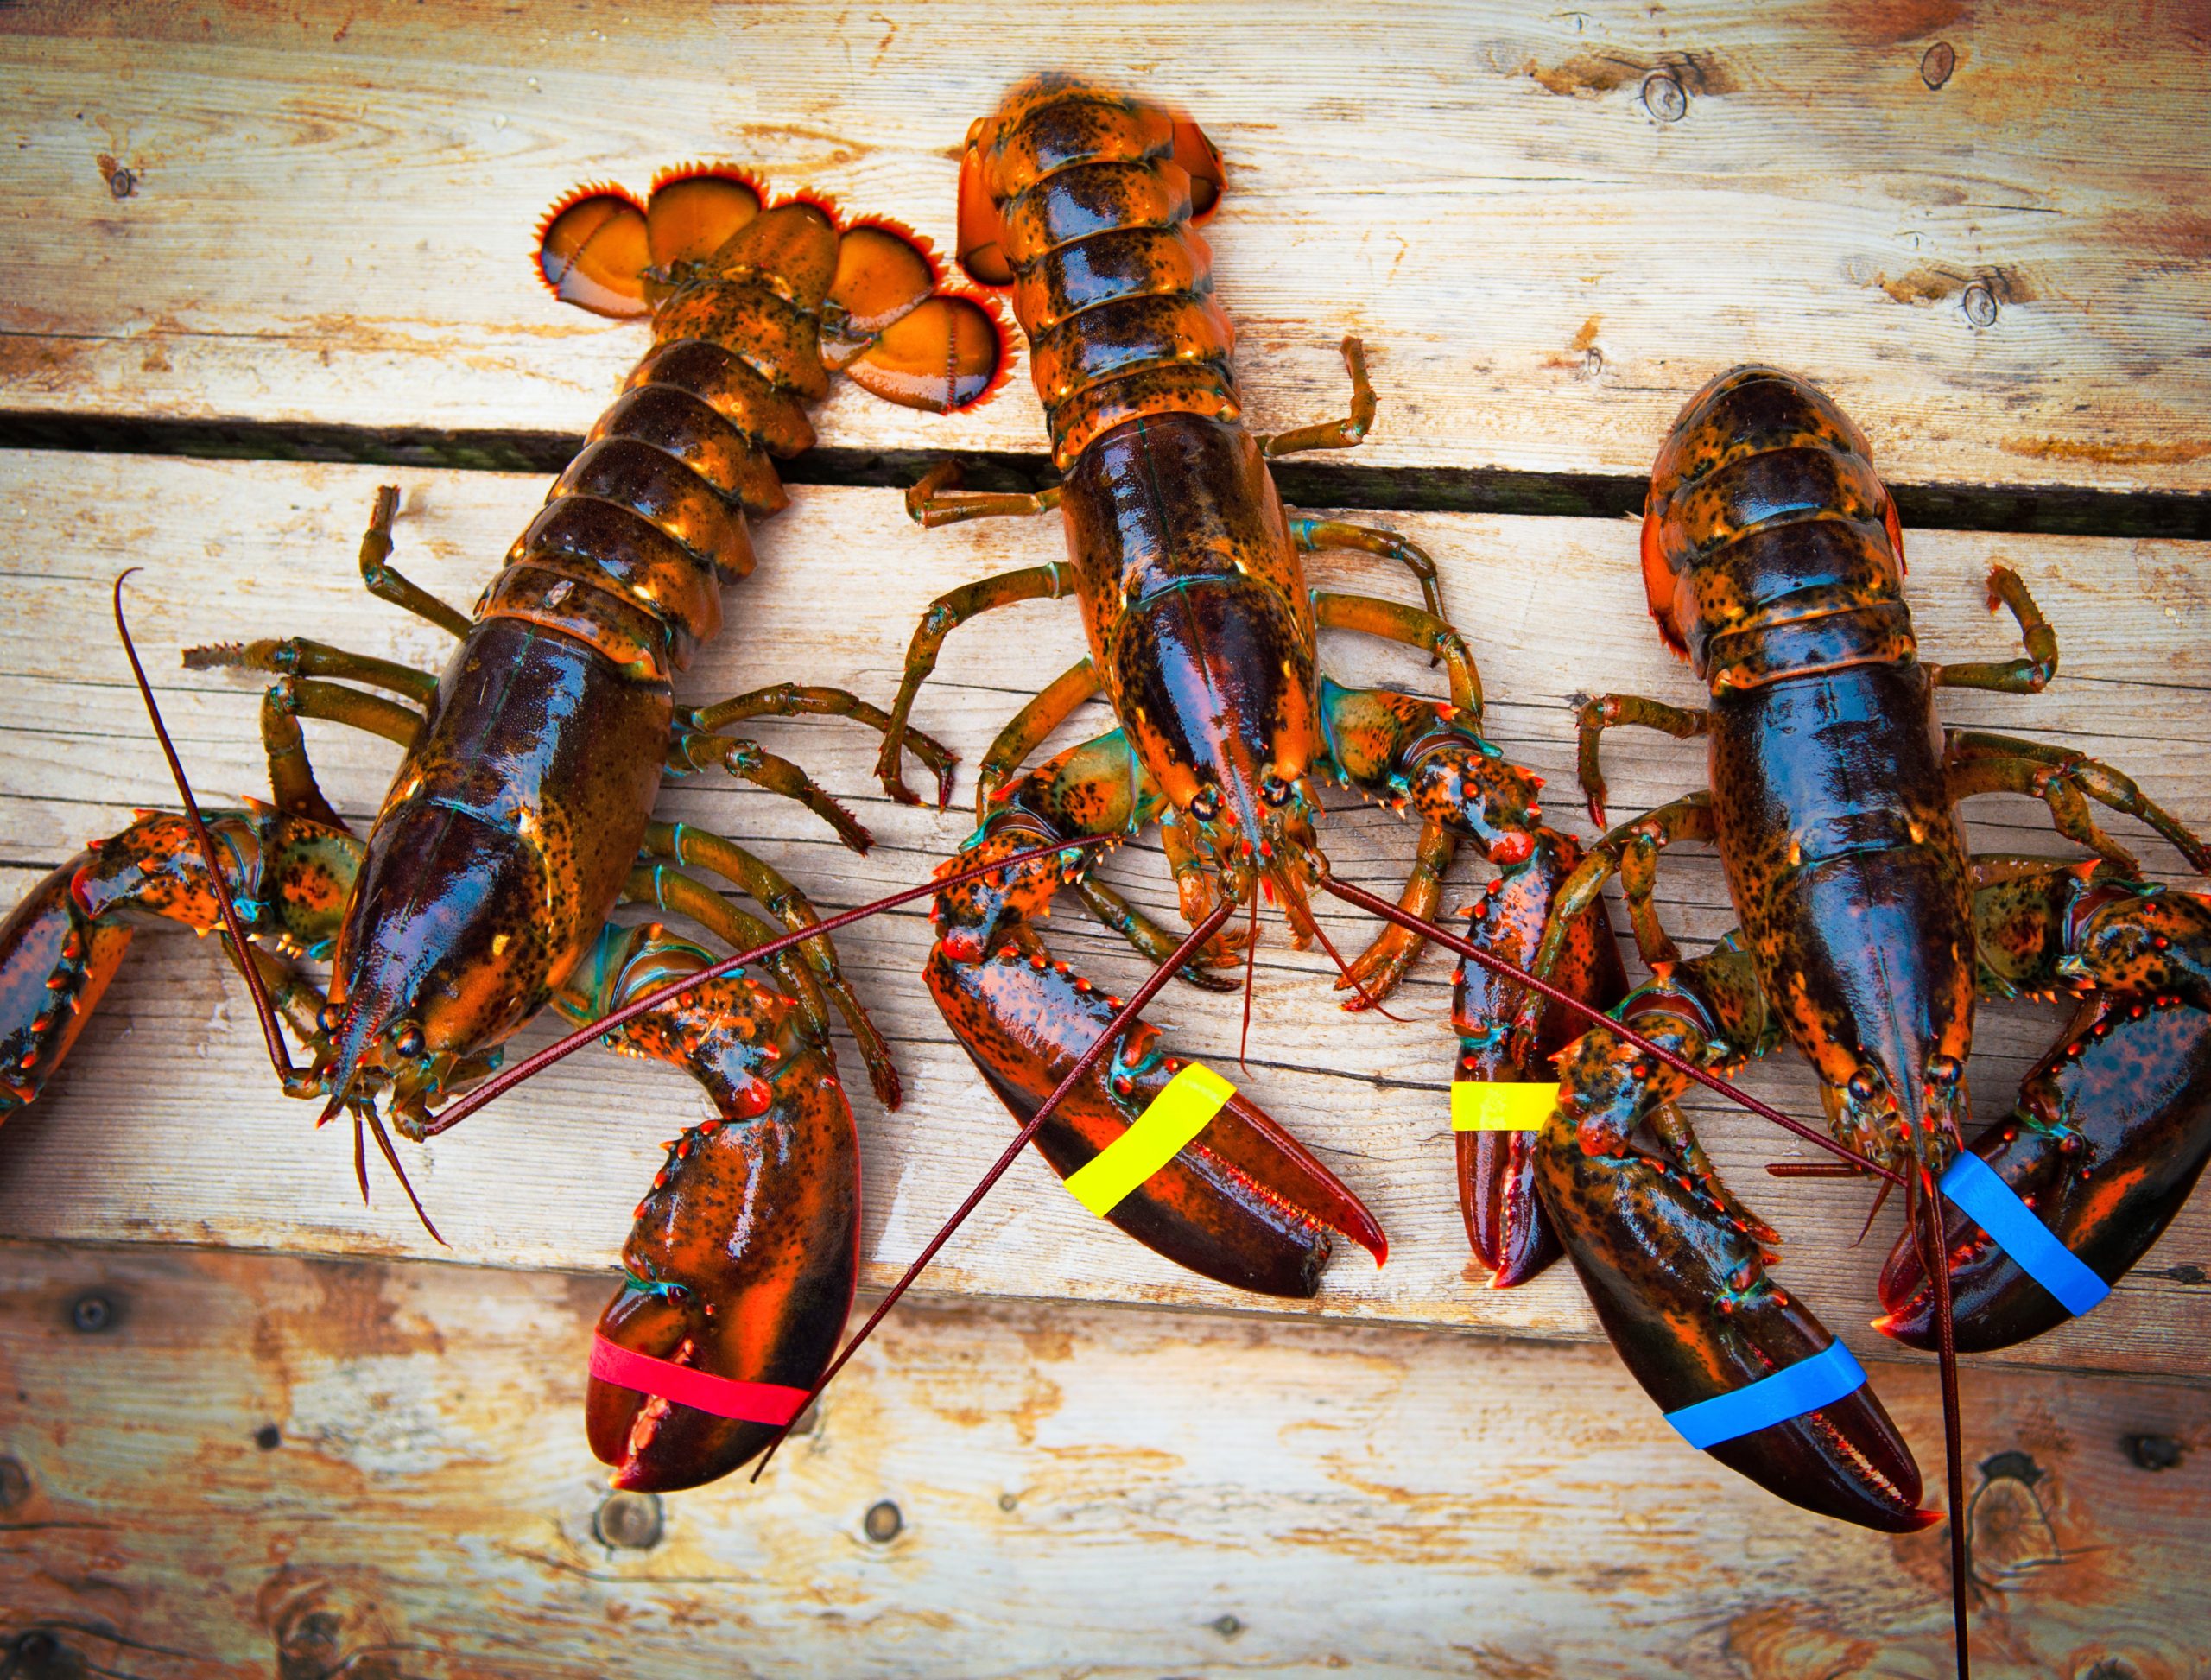 Indonesia, Vietnam can both gain from lobster aquaculture cooperation